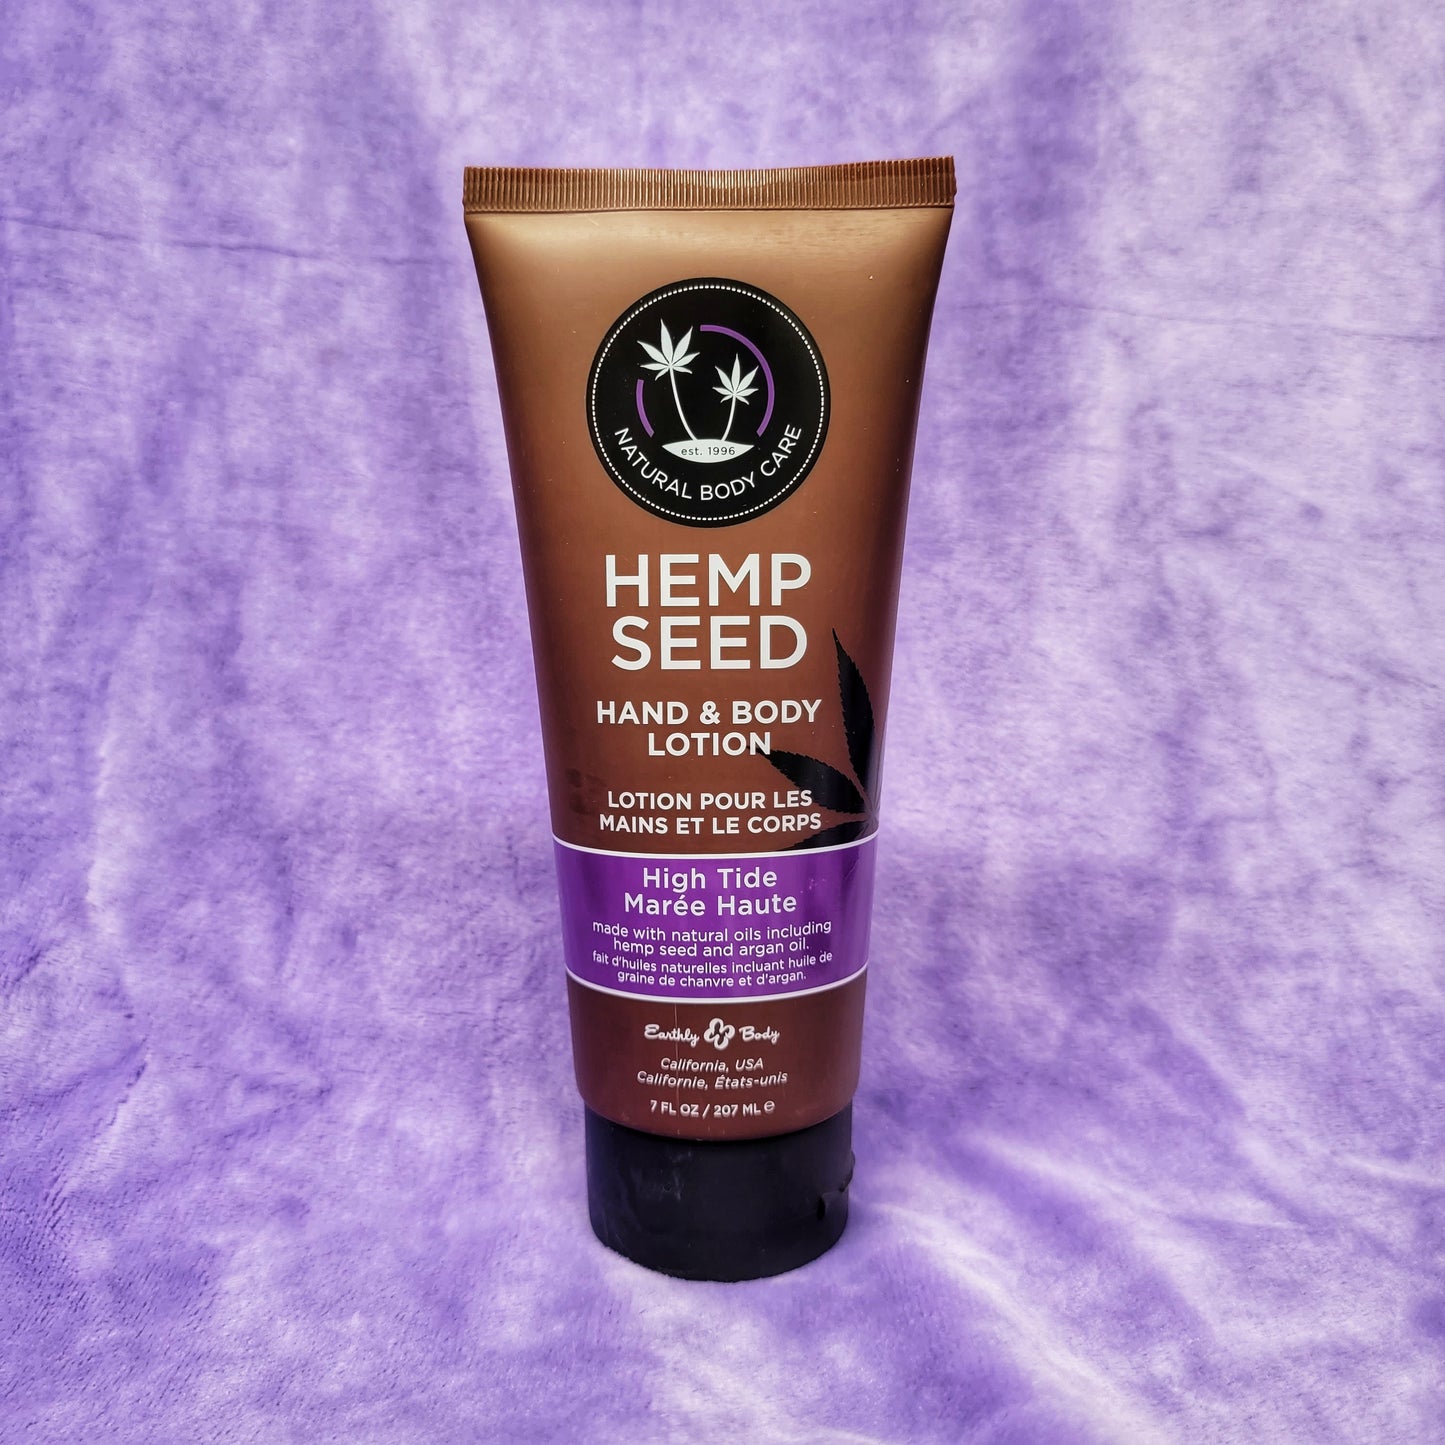 High Tide - Hemp Seed Hand & Body Lotion by Earthly Body